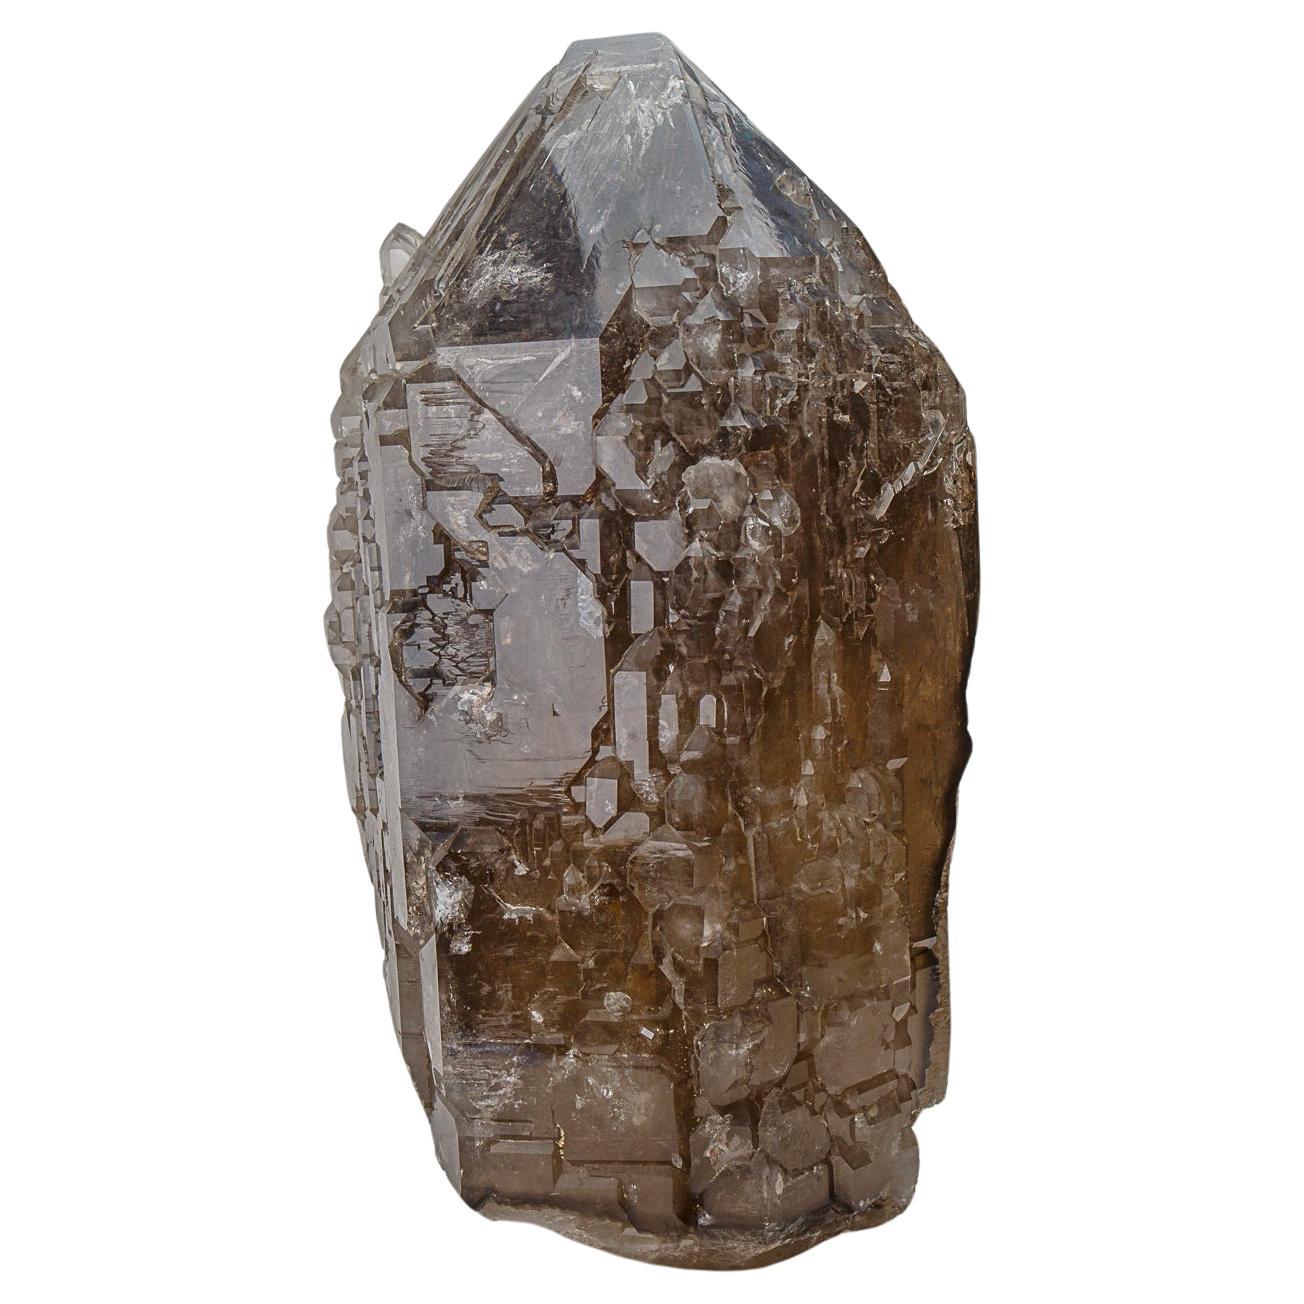 Huge Genuine Cathedral Smoky Quartz Crystal Point From Brazil (81 lbs)